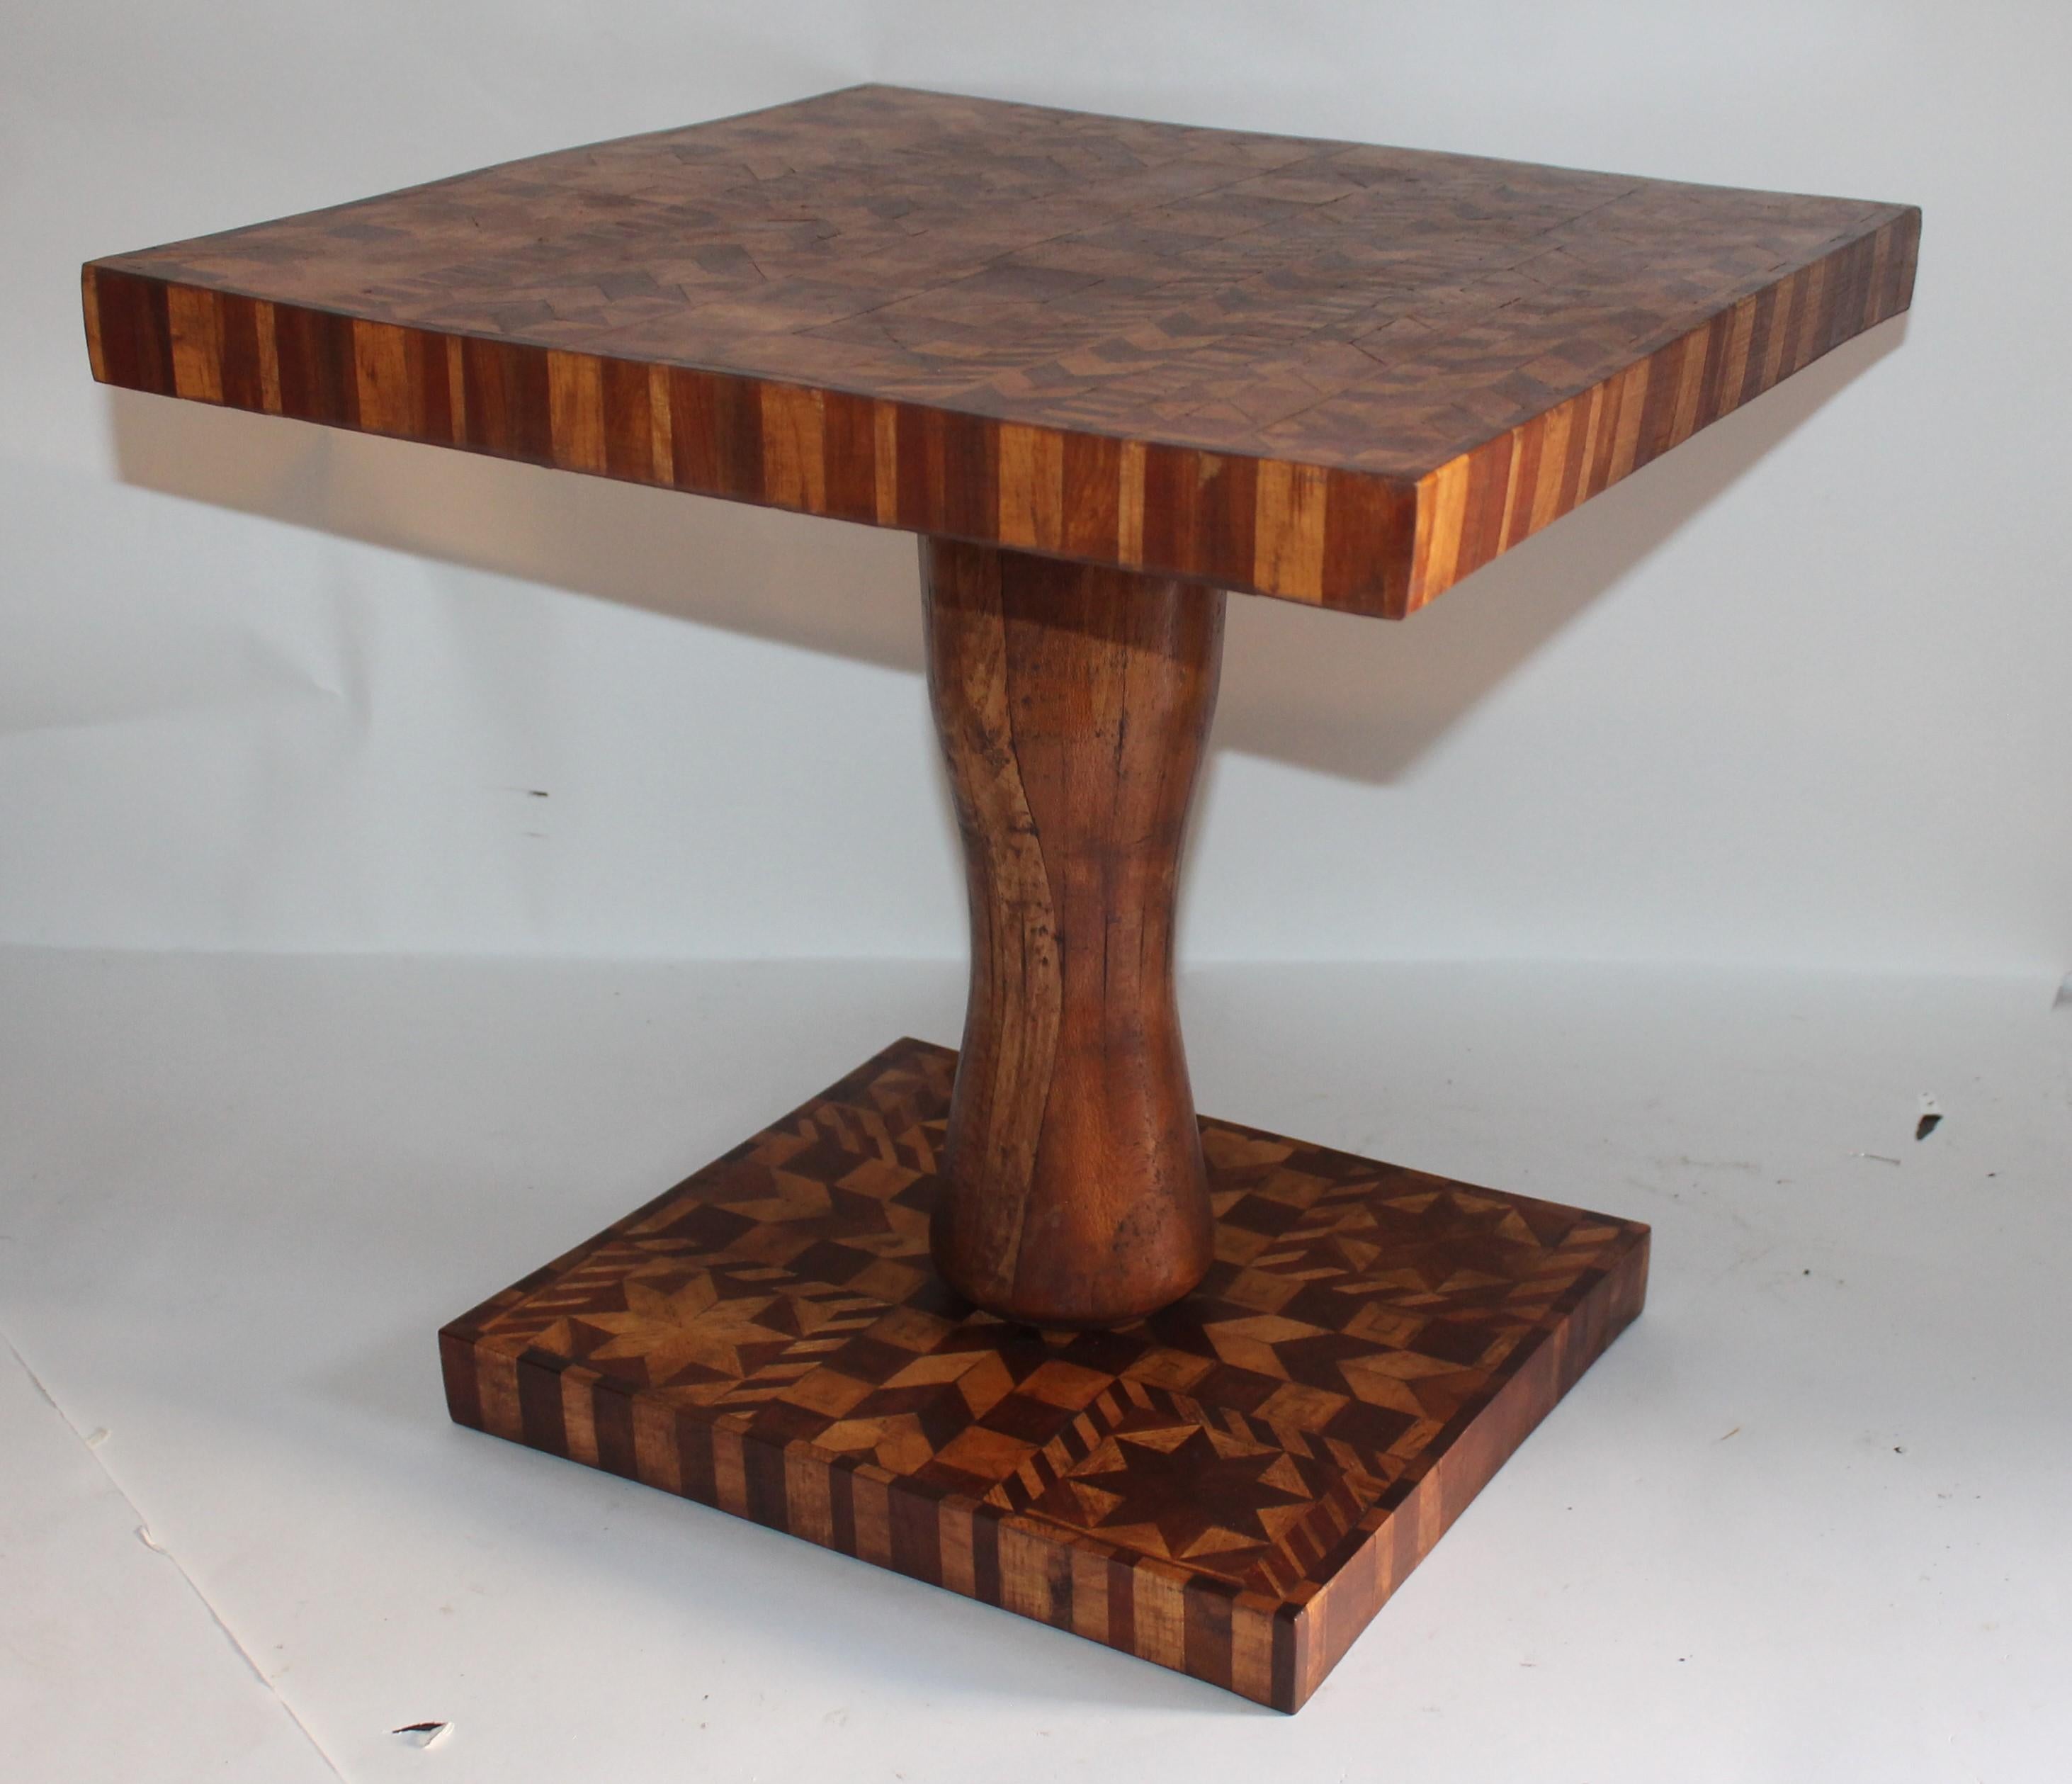 This unique folky marque table looks like a quilt pattern with stars and stripes. It is a pedestal table or a cute side table next to a club or wing chair.